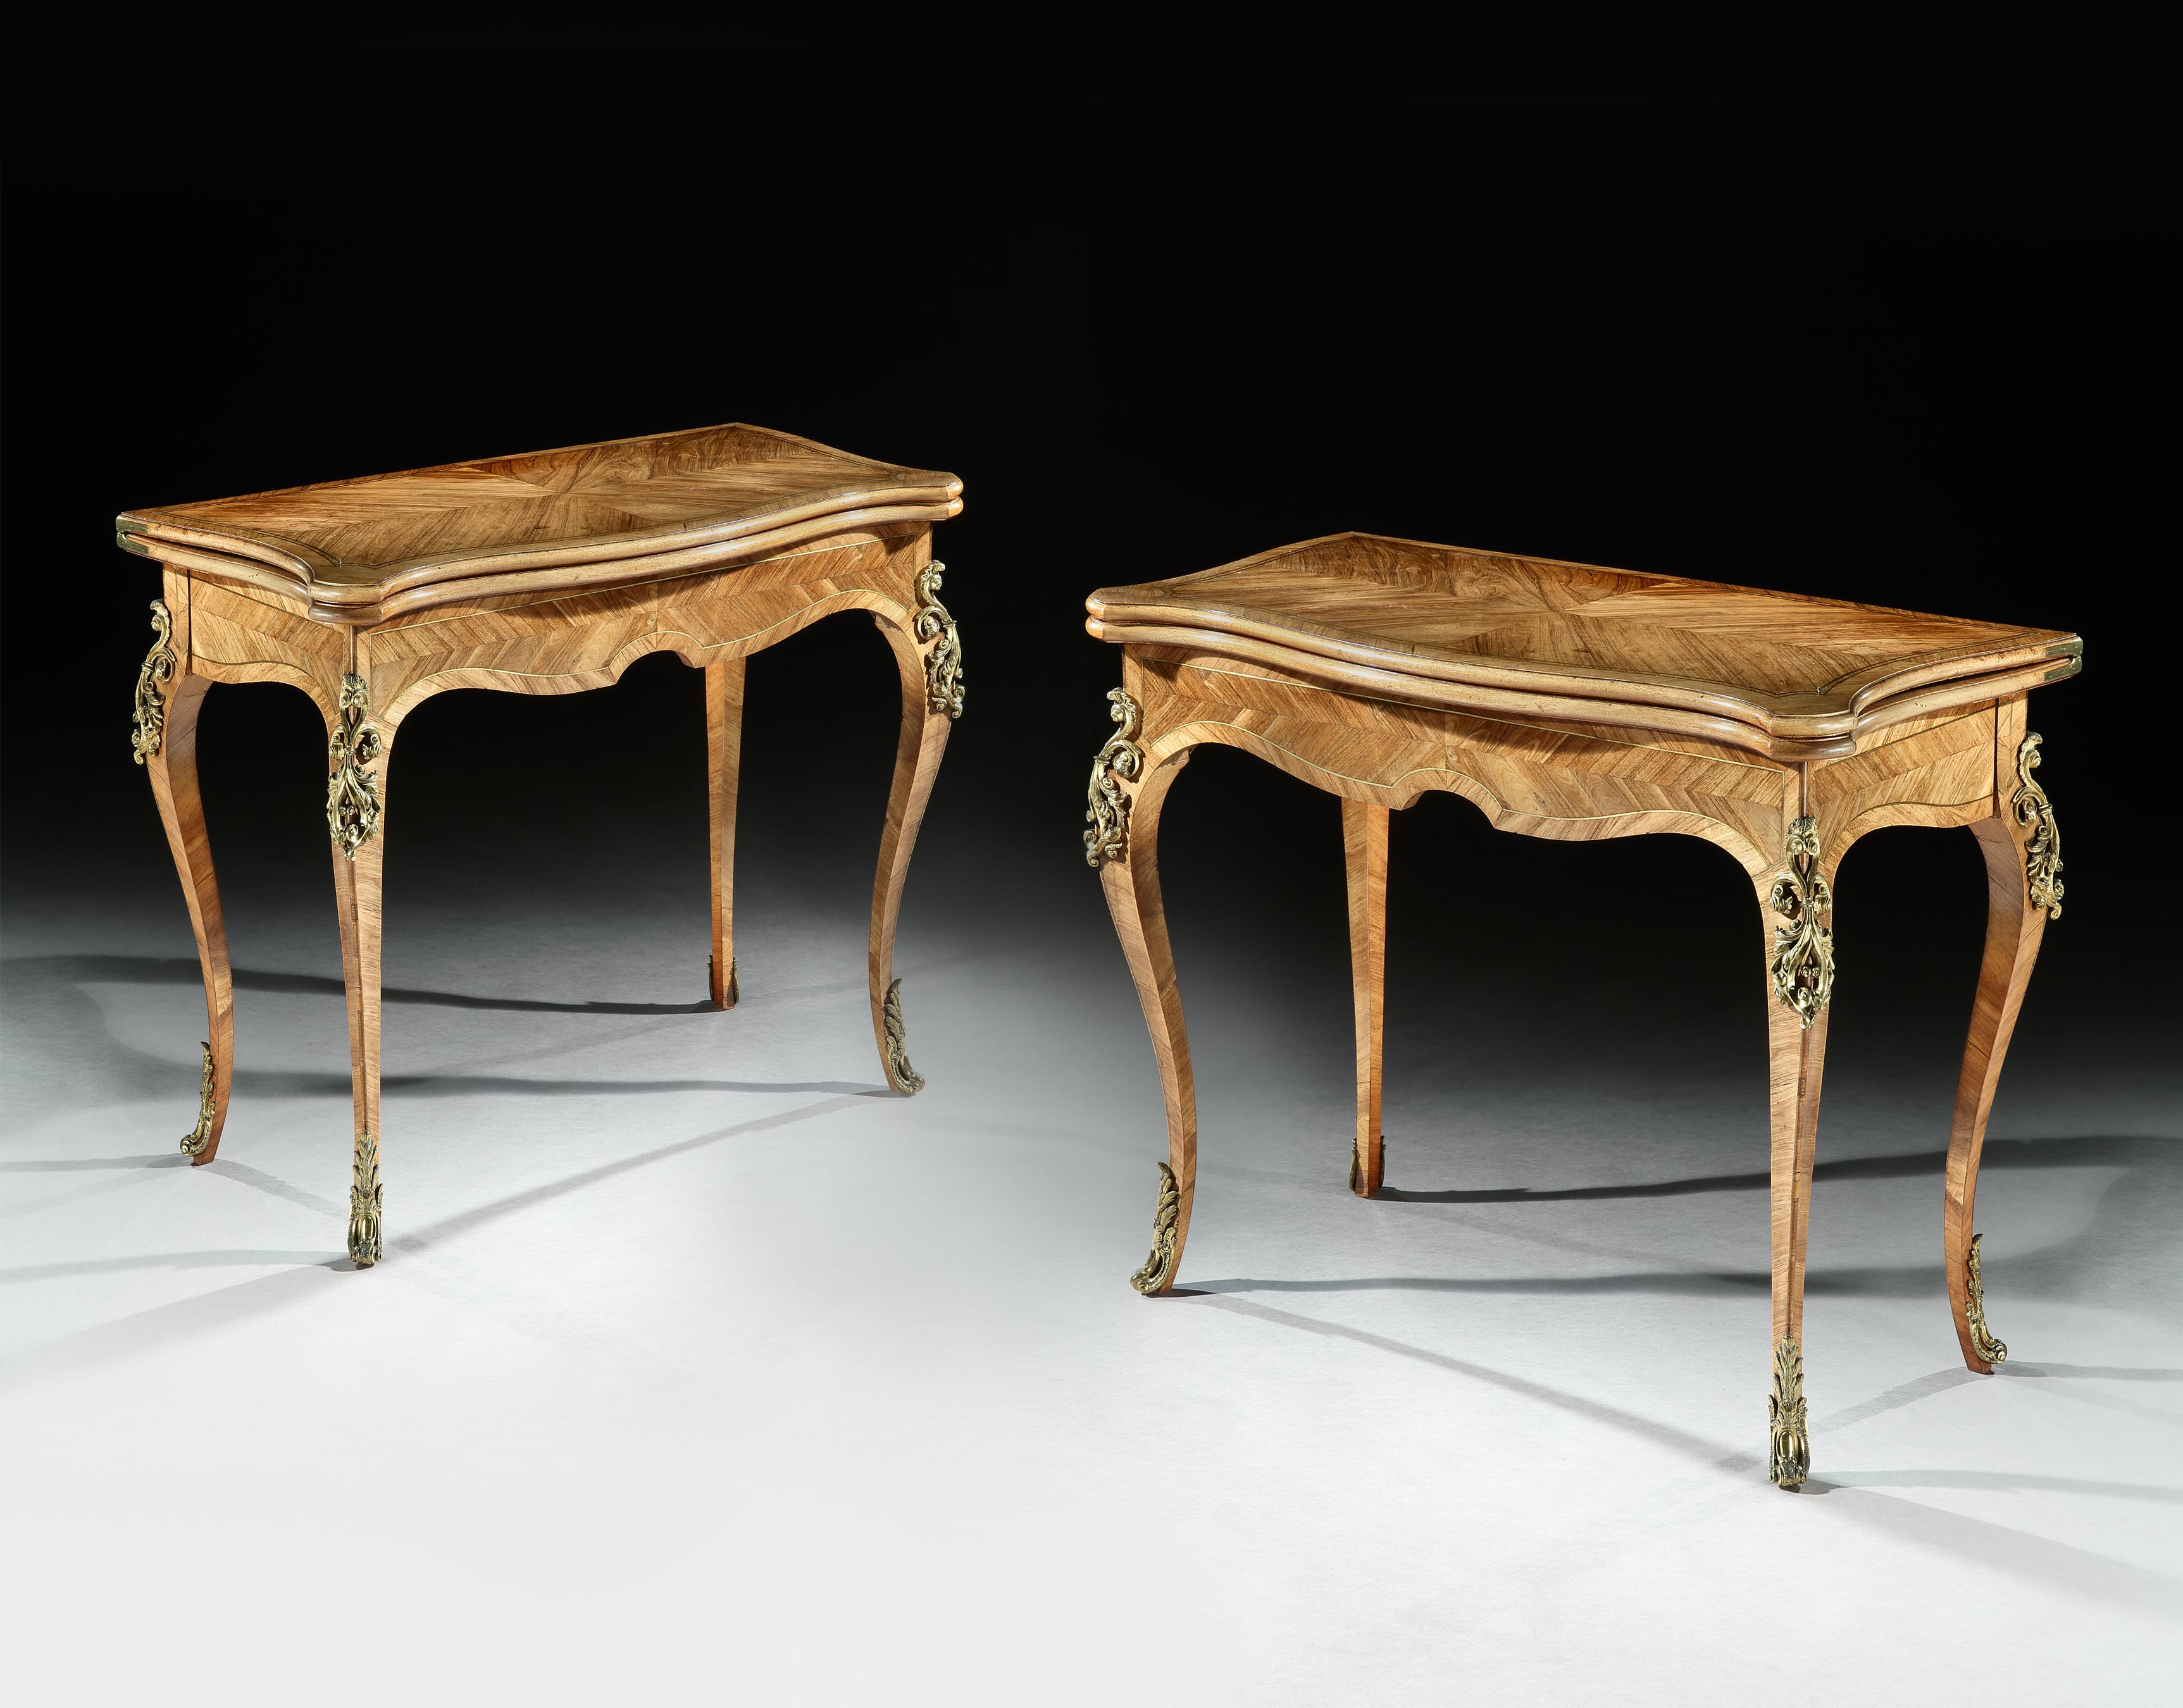 A Pair of George III Marquetry Card Tables attributed to John Cobb from Stowe, Buckinghamshire Mackinnon Fine Furniture Collection